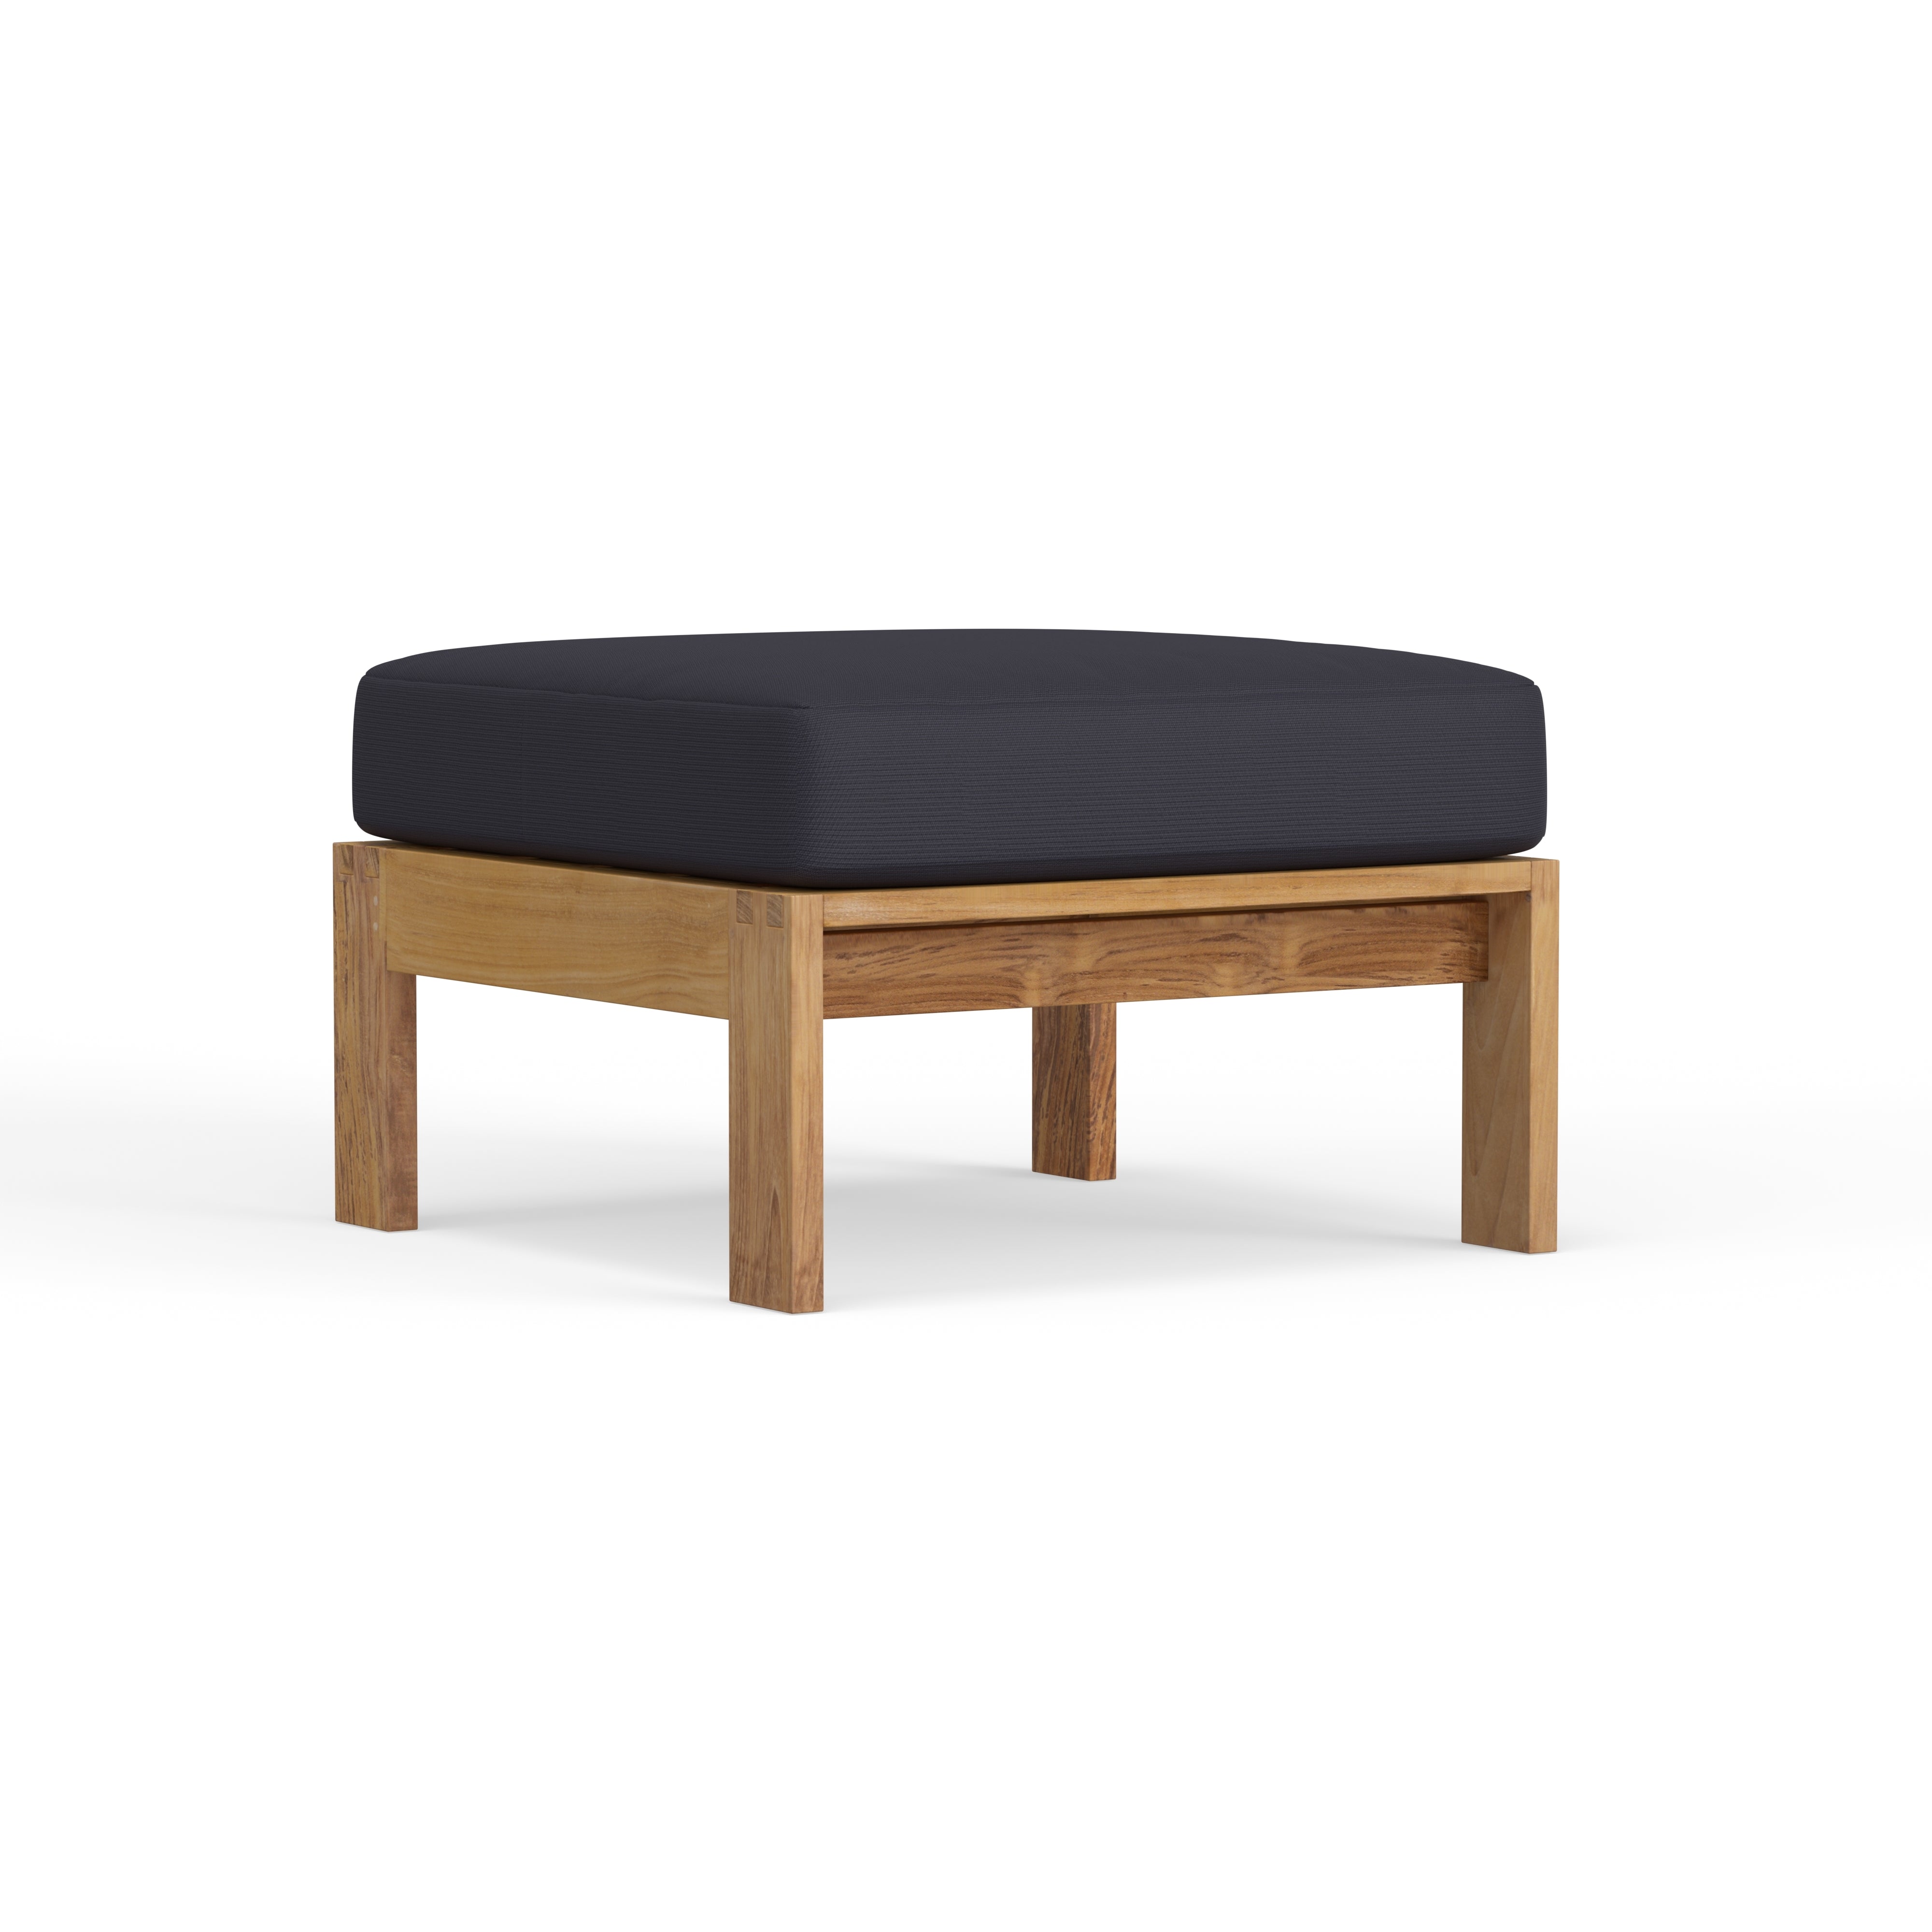 Highest Quality All Teak Outdoor Ottoman With Sunbrella Cushions Included Available Now